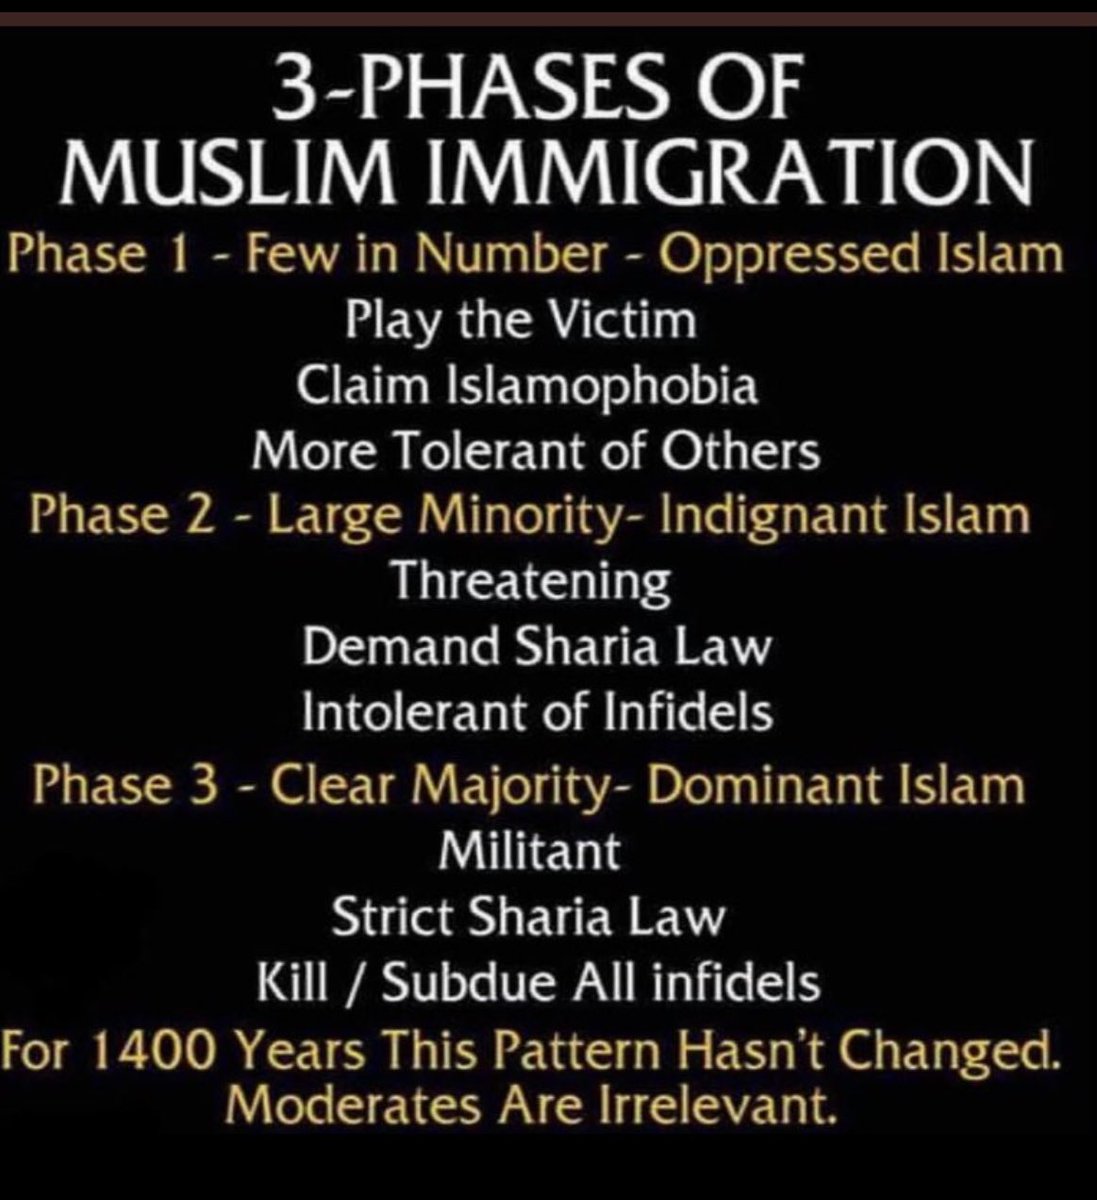 @UltraDane Worse thing about Islamic religion is INTOLERANCE by many Muslims. History shows when Muslim population reaches certain level all others are severely oppressed including gays & women.